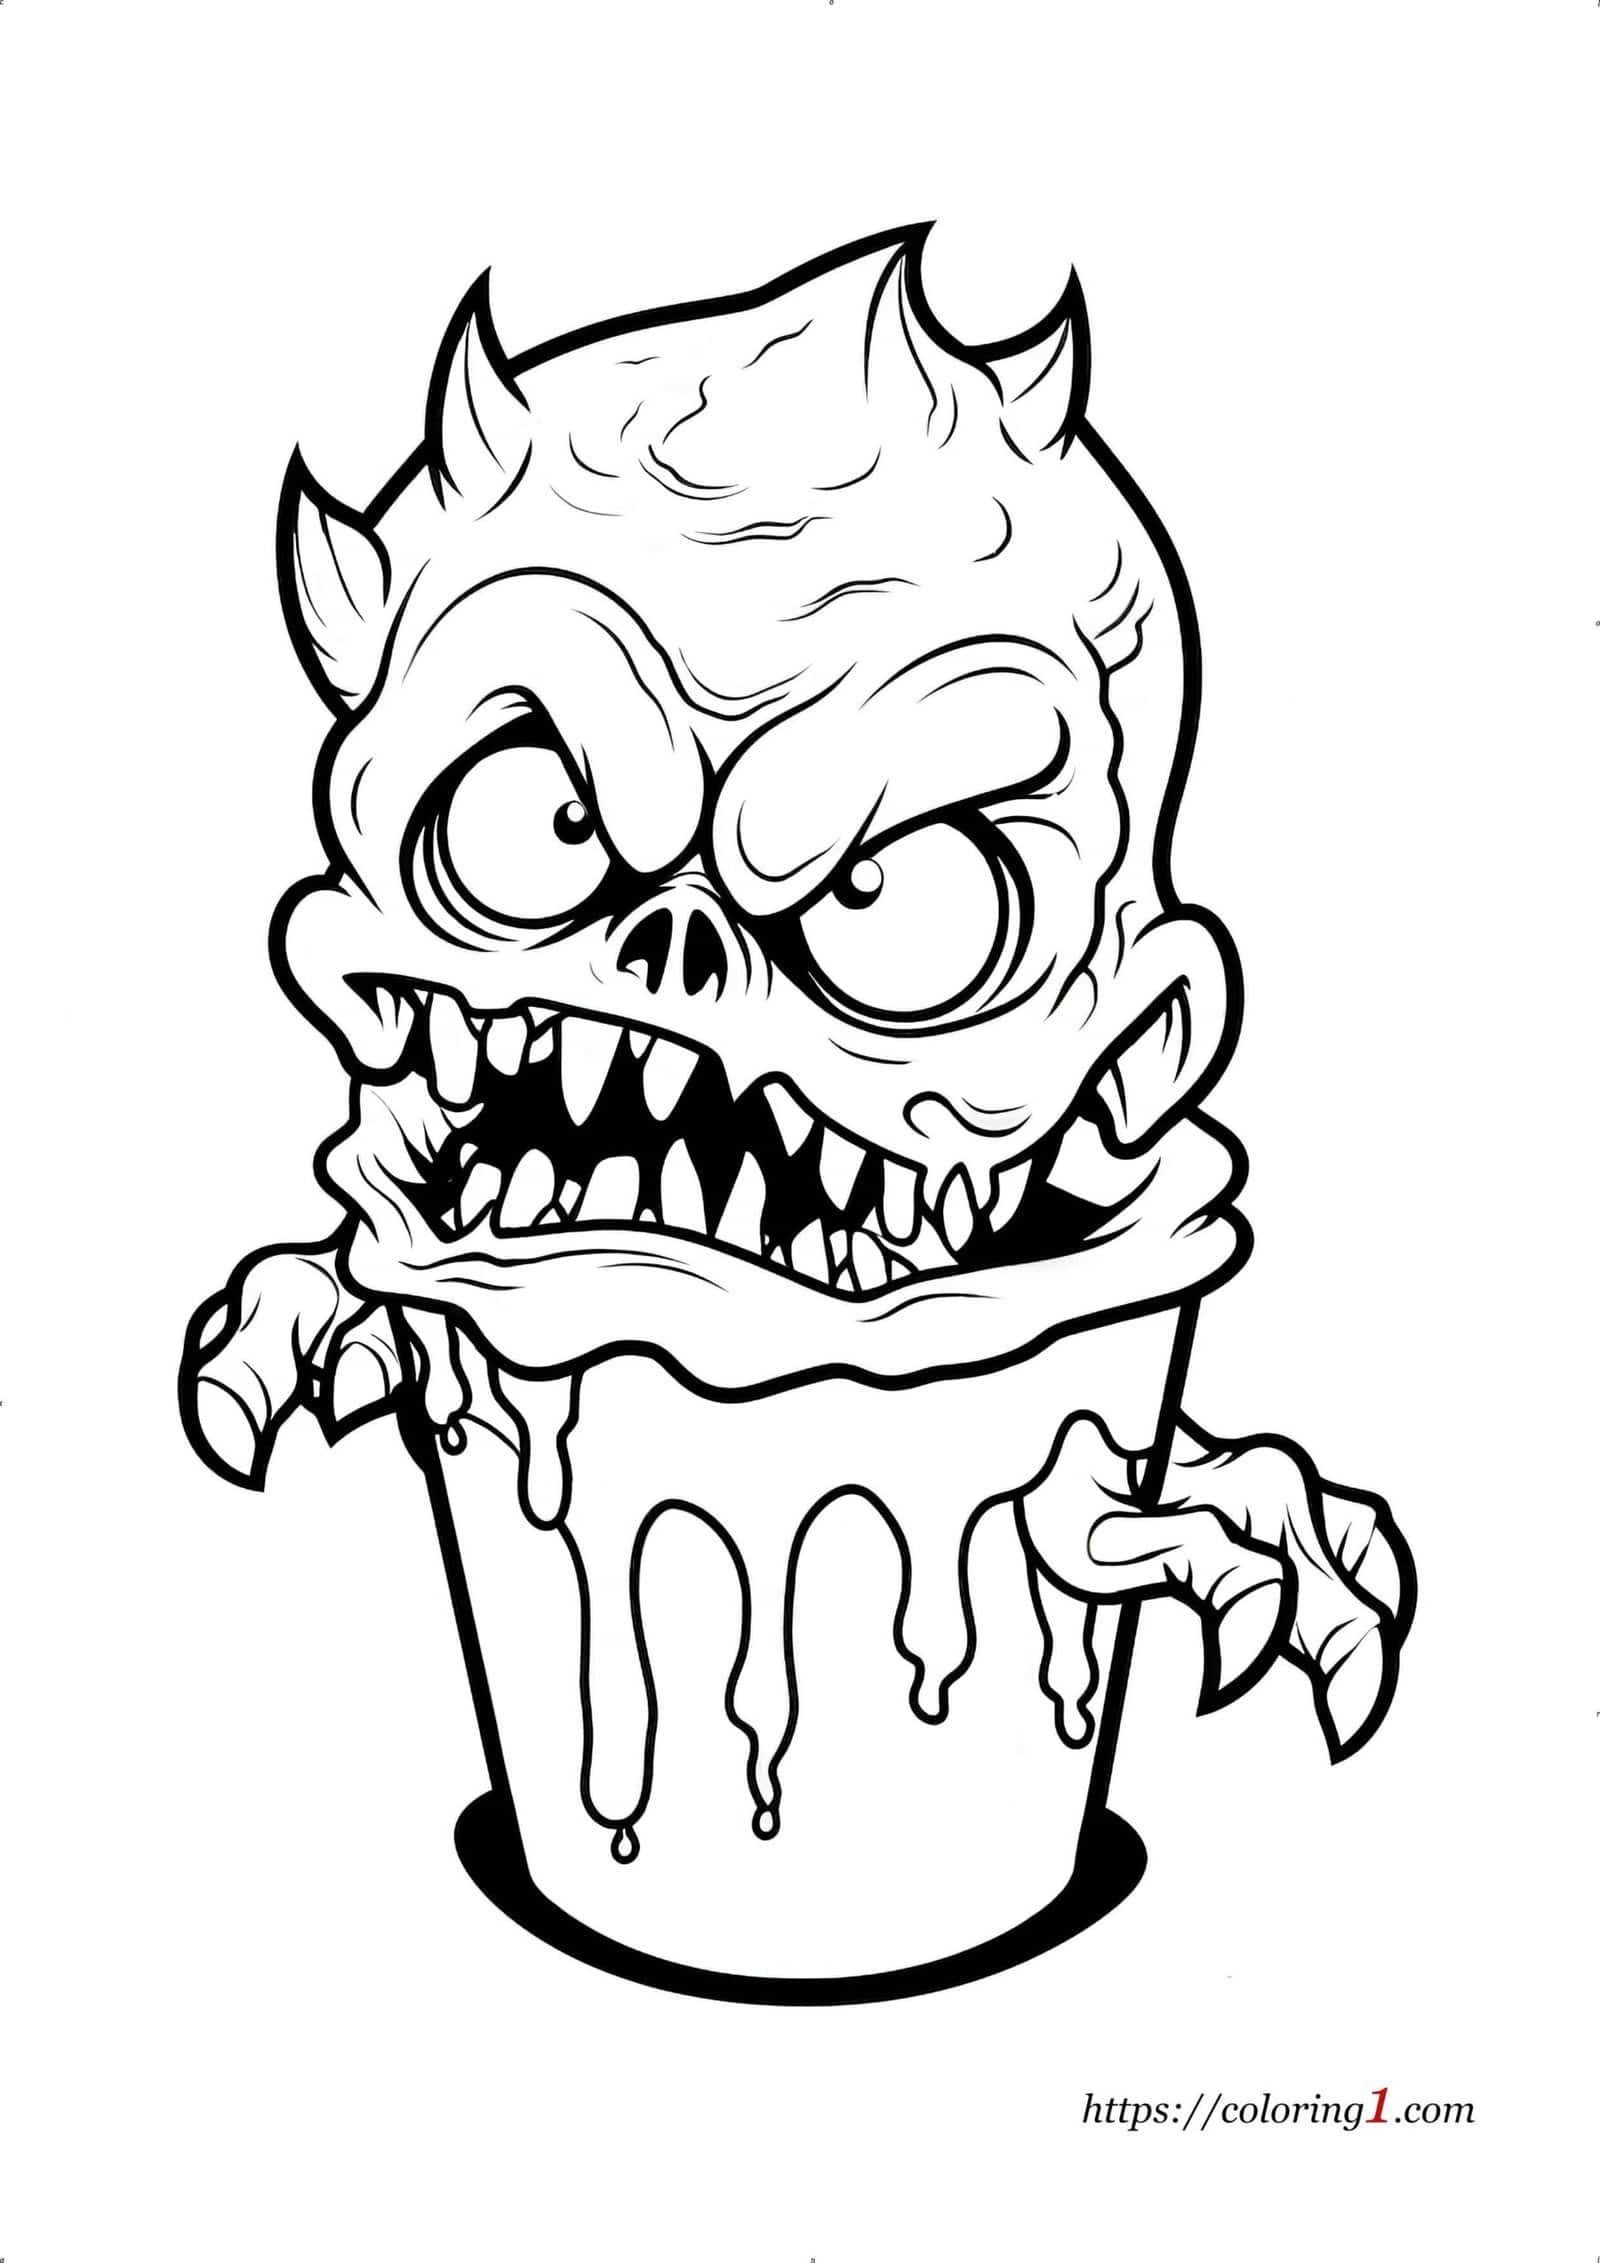 Ice Cream Zombie difficult coloring page